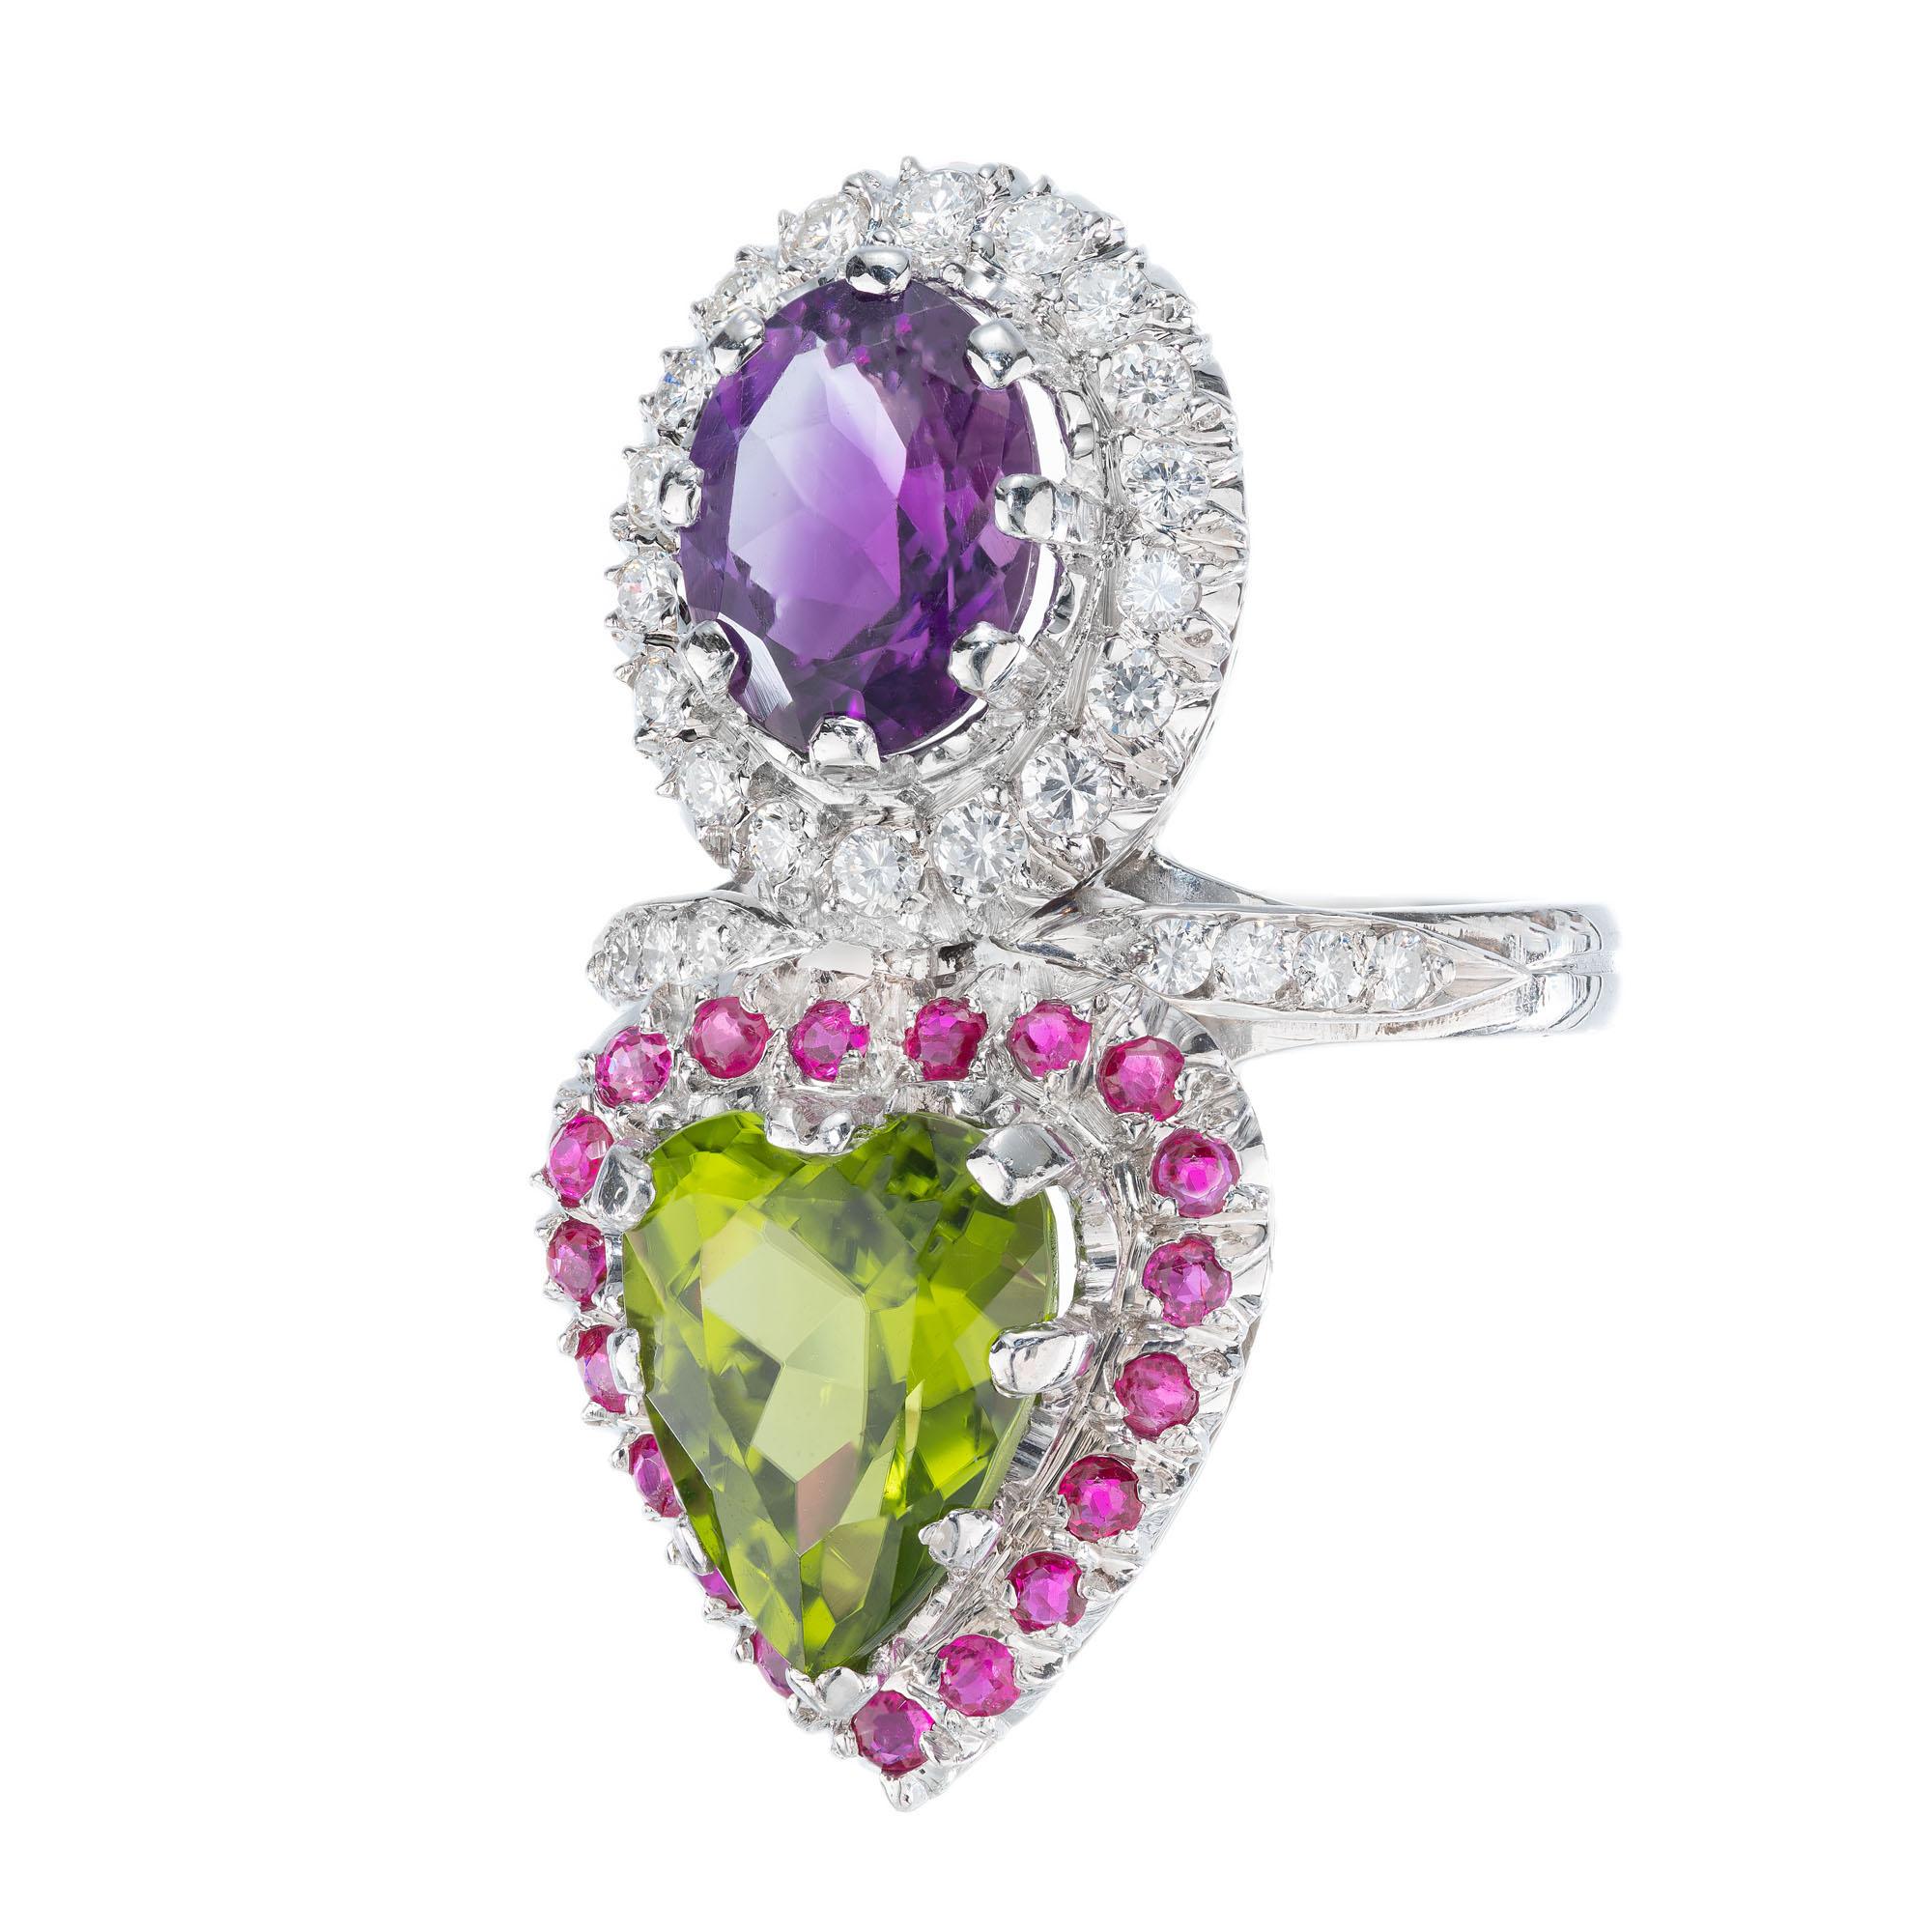 Peridot, ruby, amethyst and diamond cocktail ring. Oval amethyst with a halo of round diamonds. Heart shaped peridot with a halo of round rubies. Set in platinum with accent diamonds on the shank. 

1 heart shaped gem natural bright green Peridot,